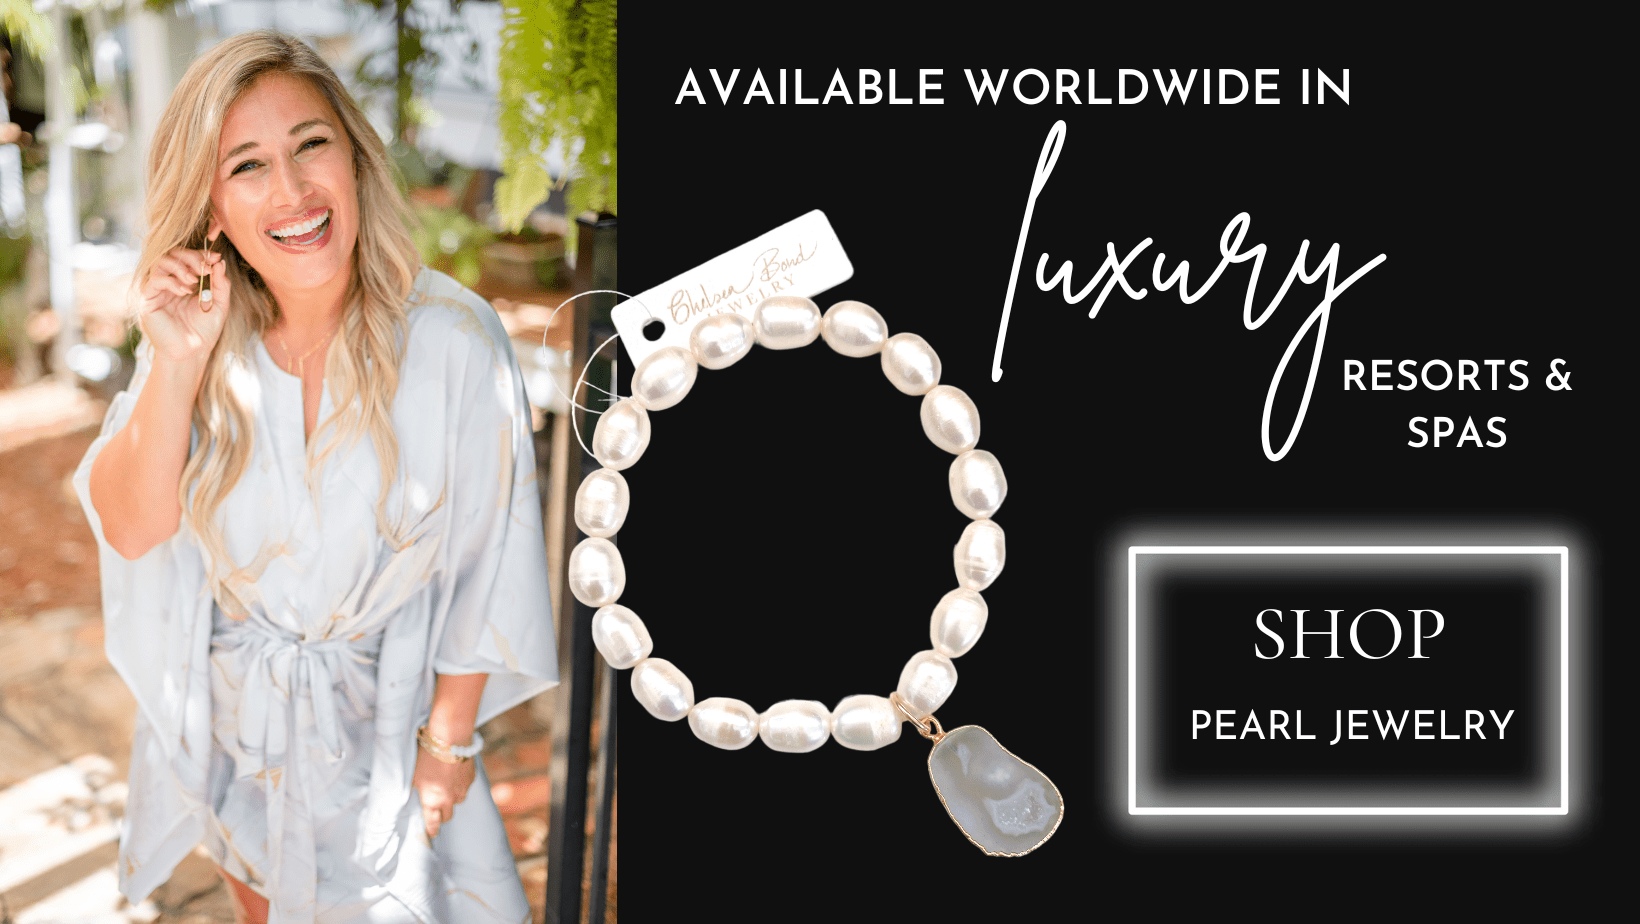 pearl bracelet with gray druzy charm and woman with blonde hair with floral kimono dress.